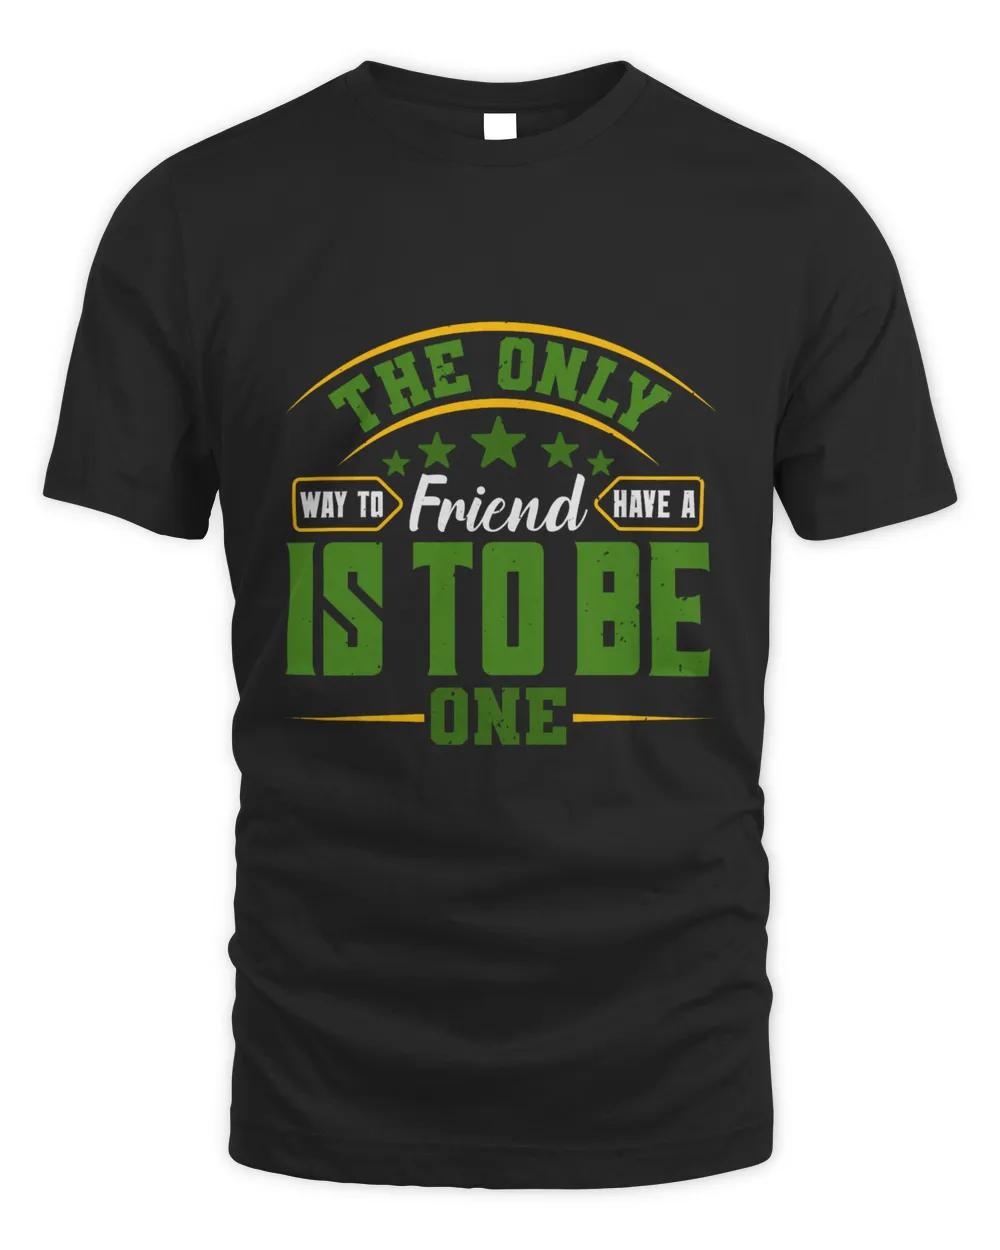 The Only Way To Have A Friend Is To Be One Bestie Gift, Best Friend Gift, Best Friend T Shirt, Bestie Shirt, Best Friend Shirt, Friendship Gift, Best Friend Birthday Gift, Friendship